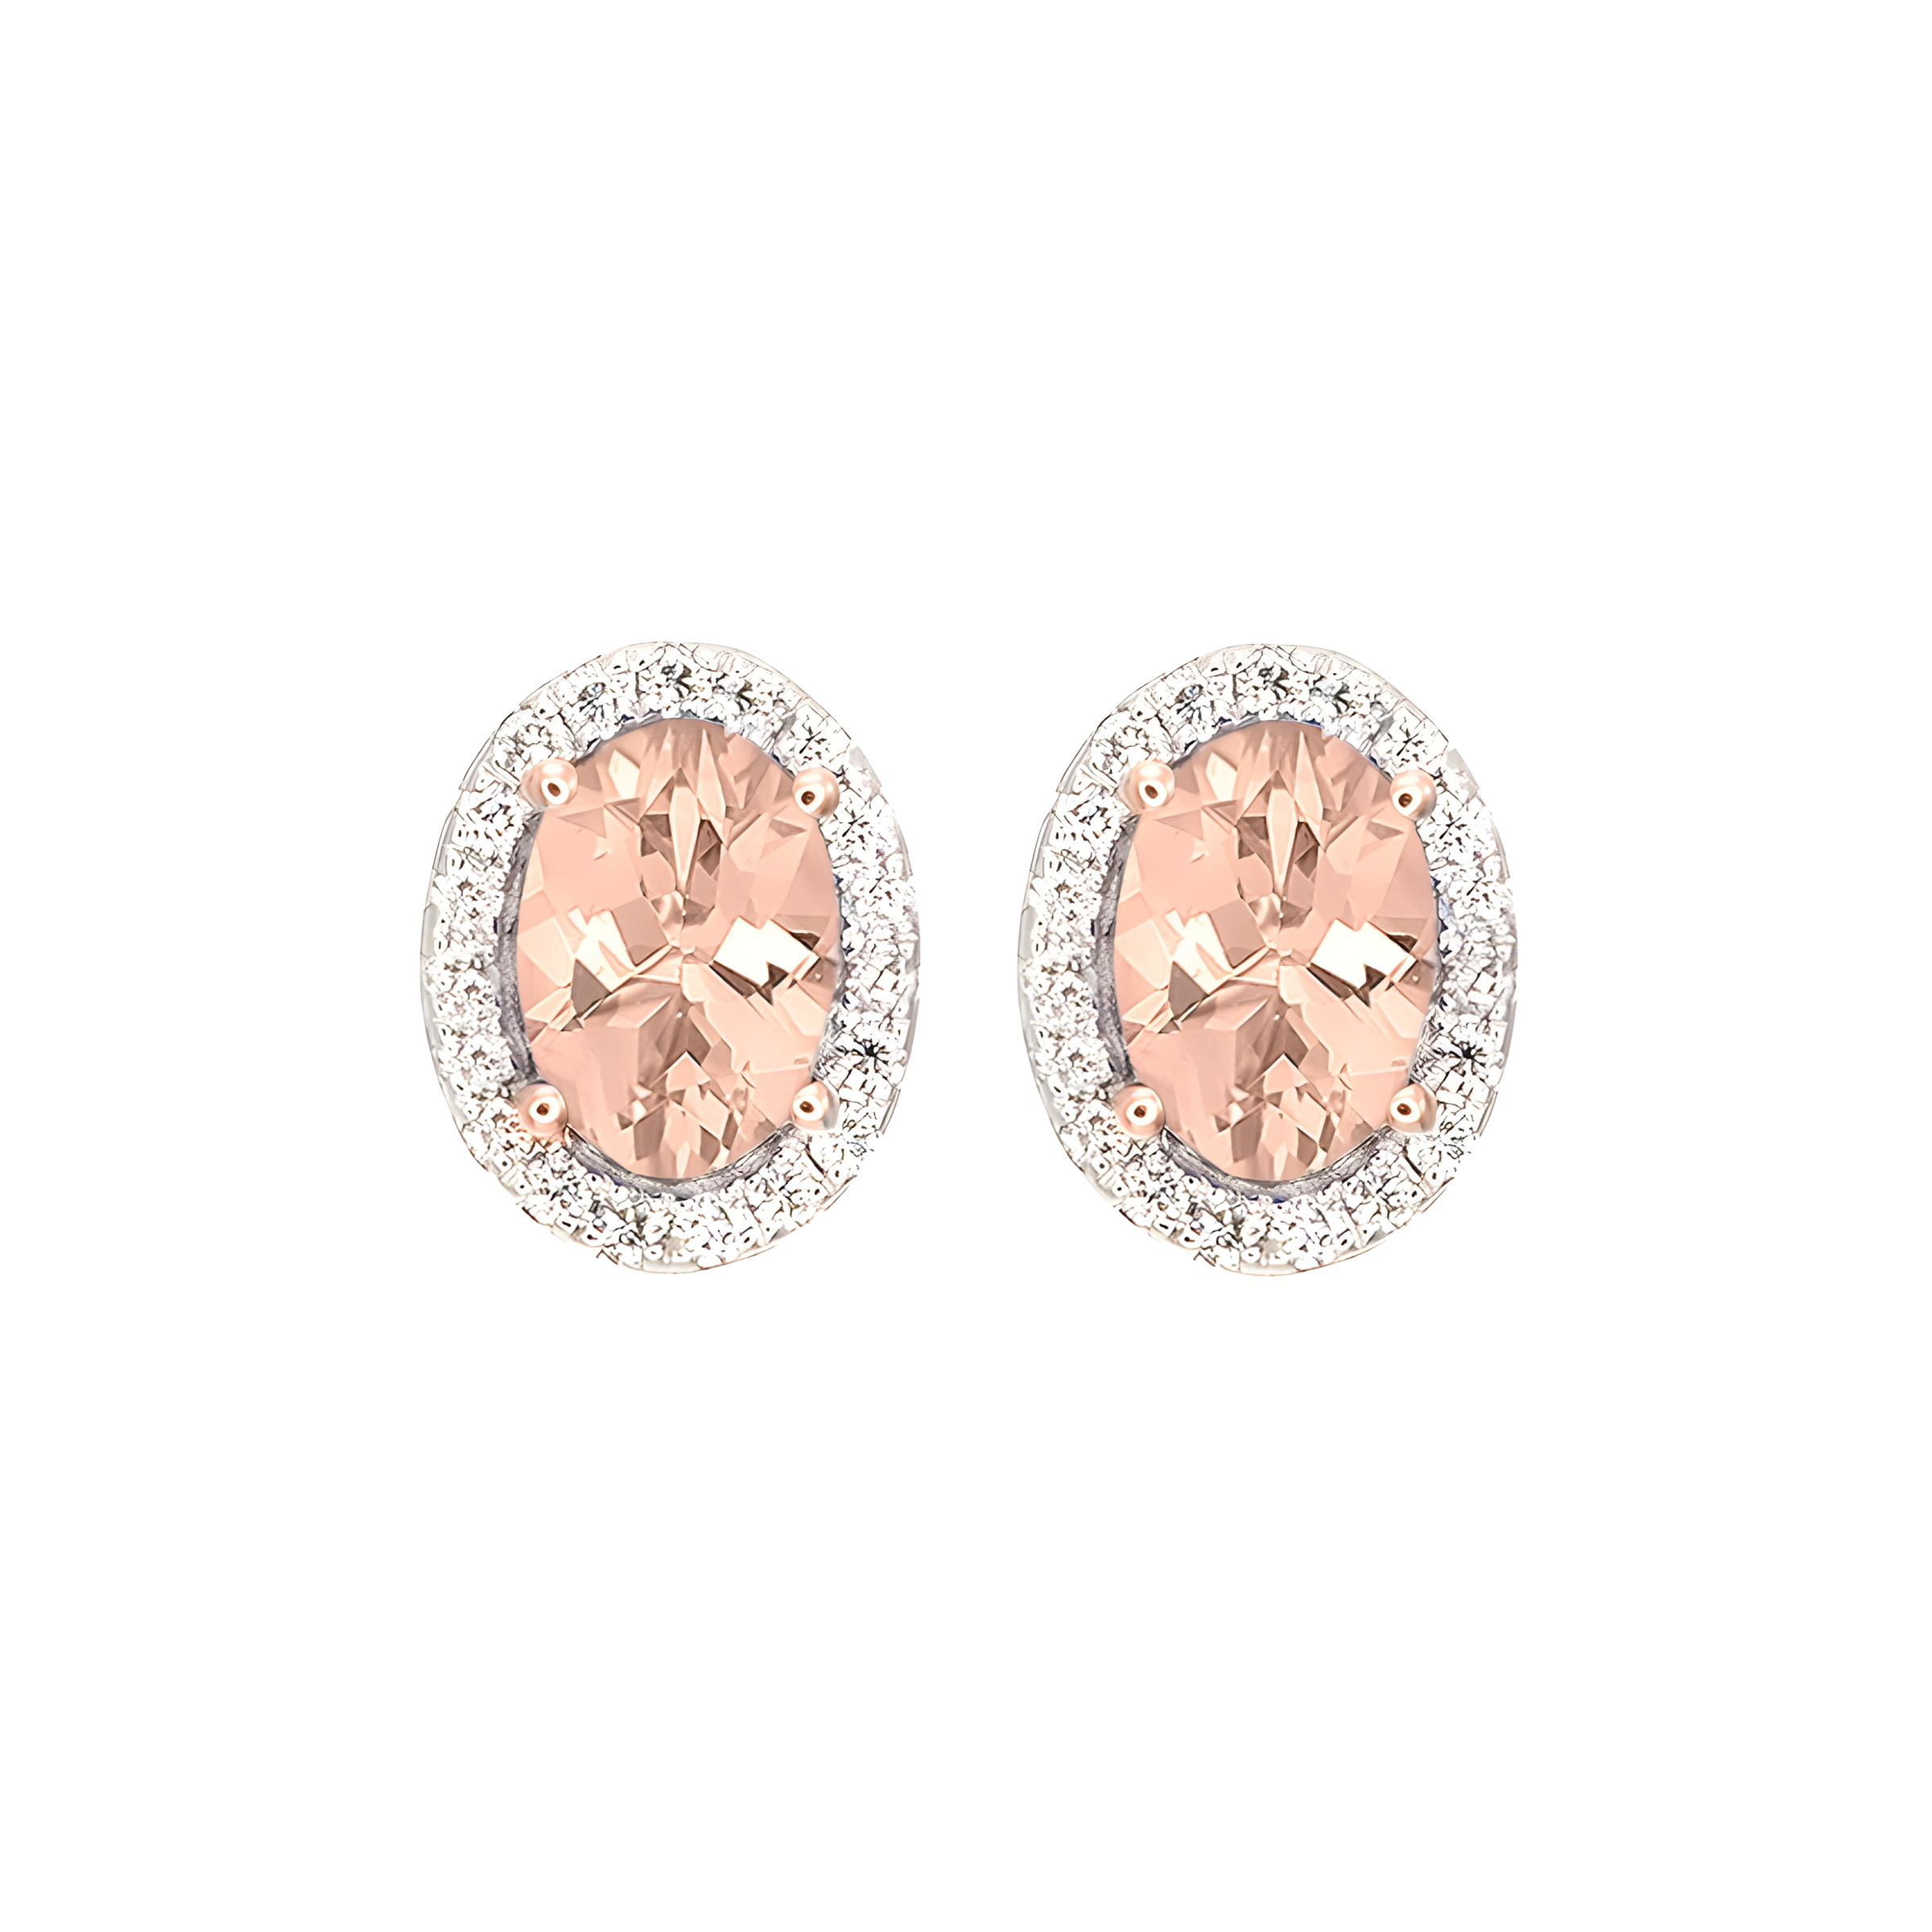 Oval Morganite And Diamond Halo Stud Earrings in 18k Rose Gold